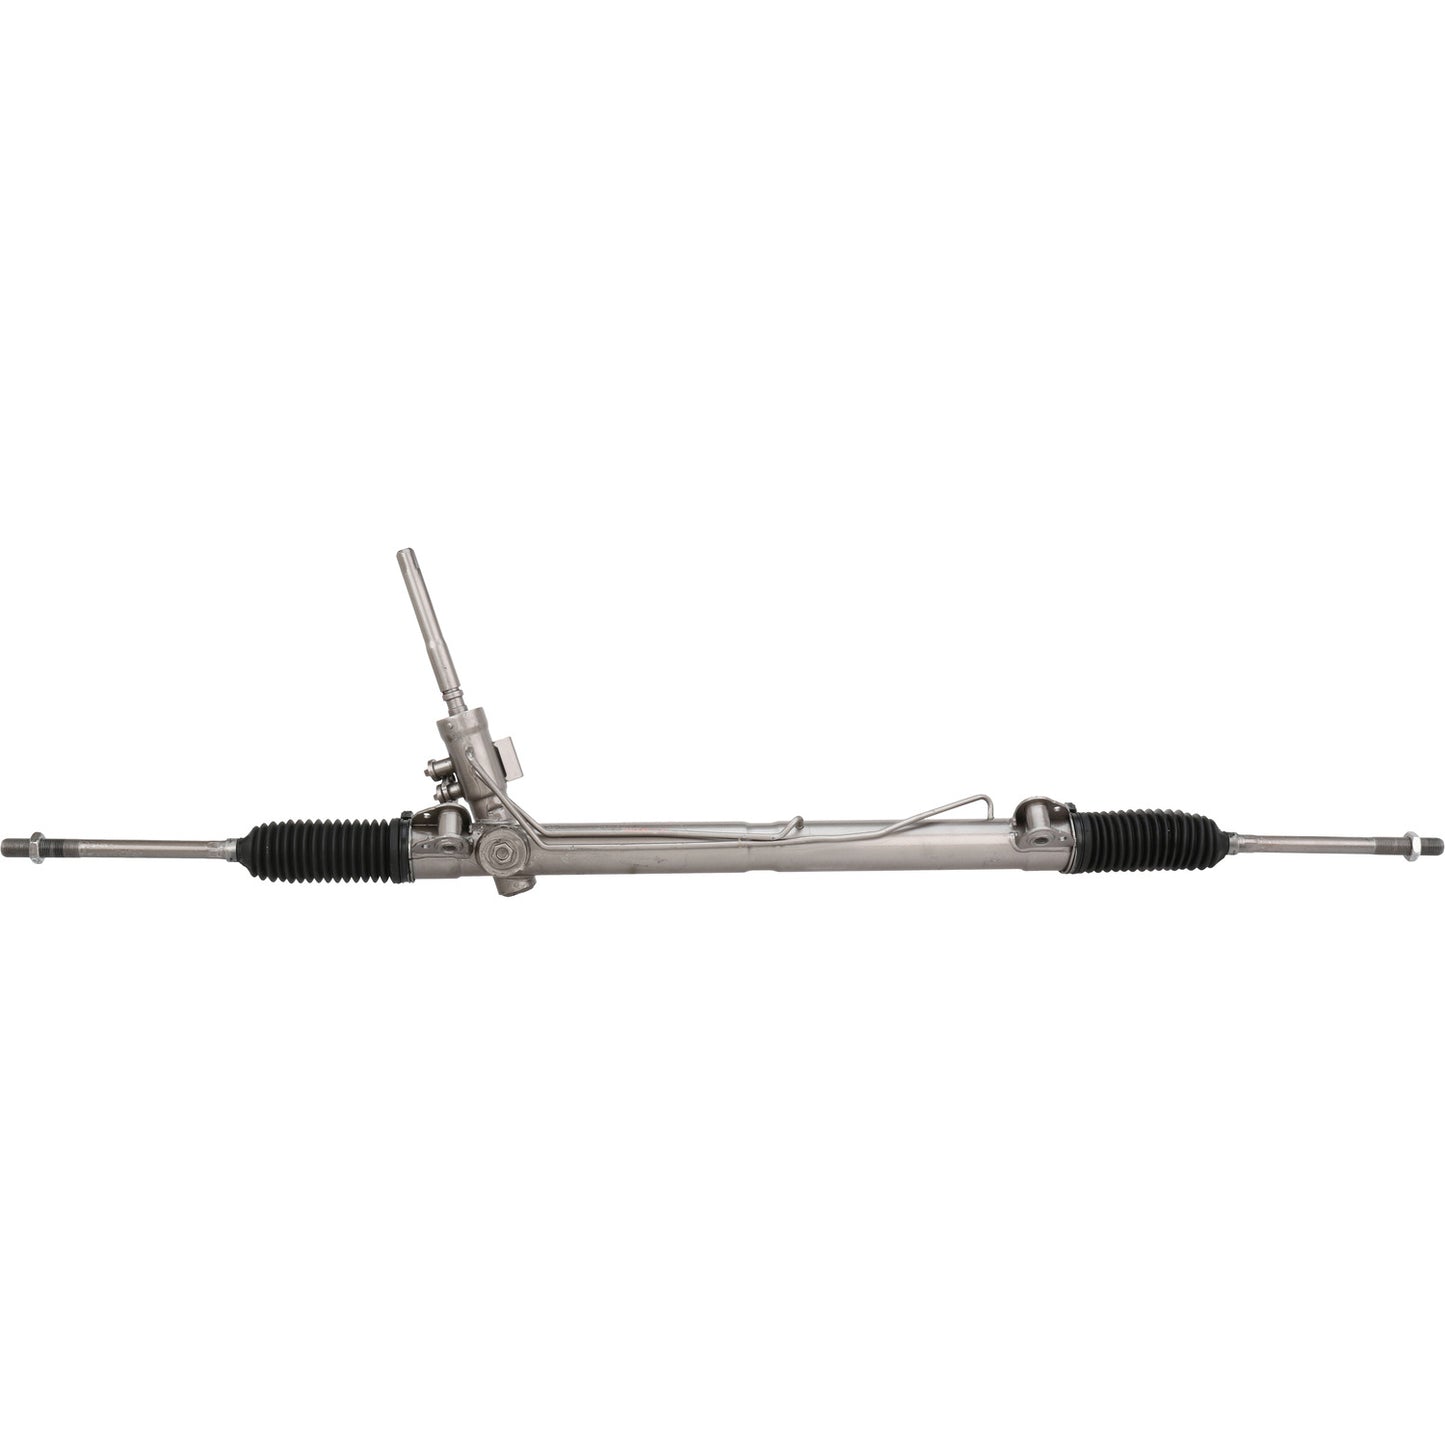 Rack and Pinion Assembly - MAVAL - Hydraulic Power - Remanufactured - 93443M